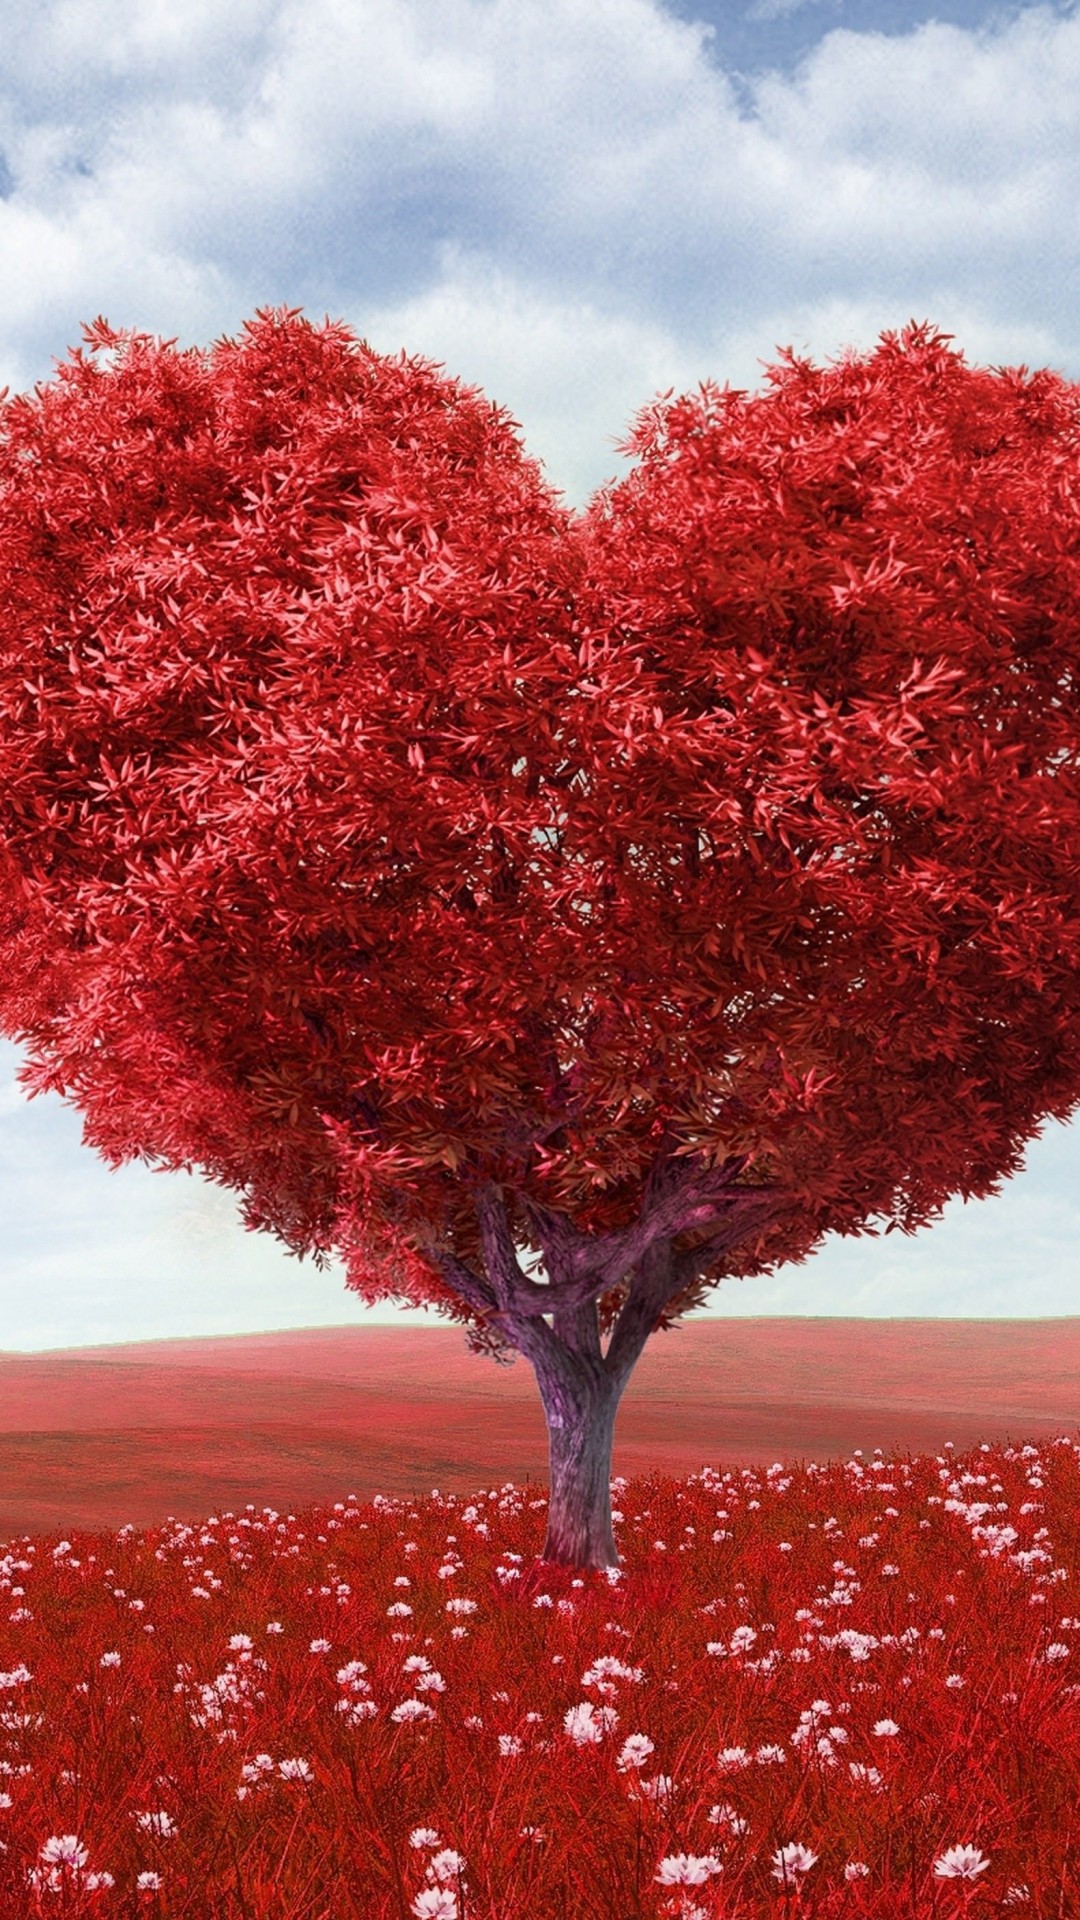 The Tree Of Love Wallpaper for LG G2